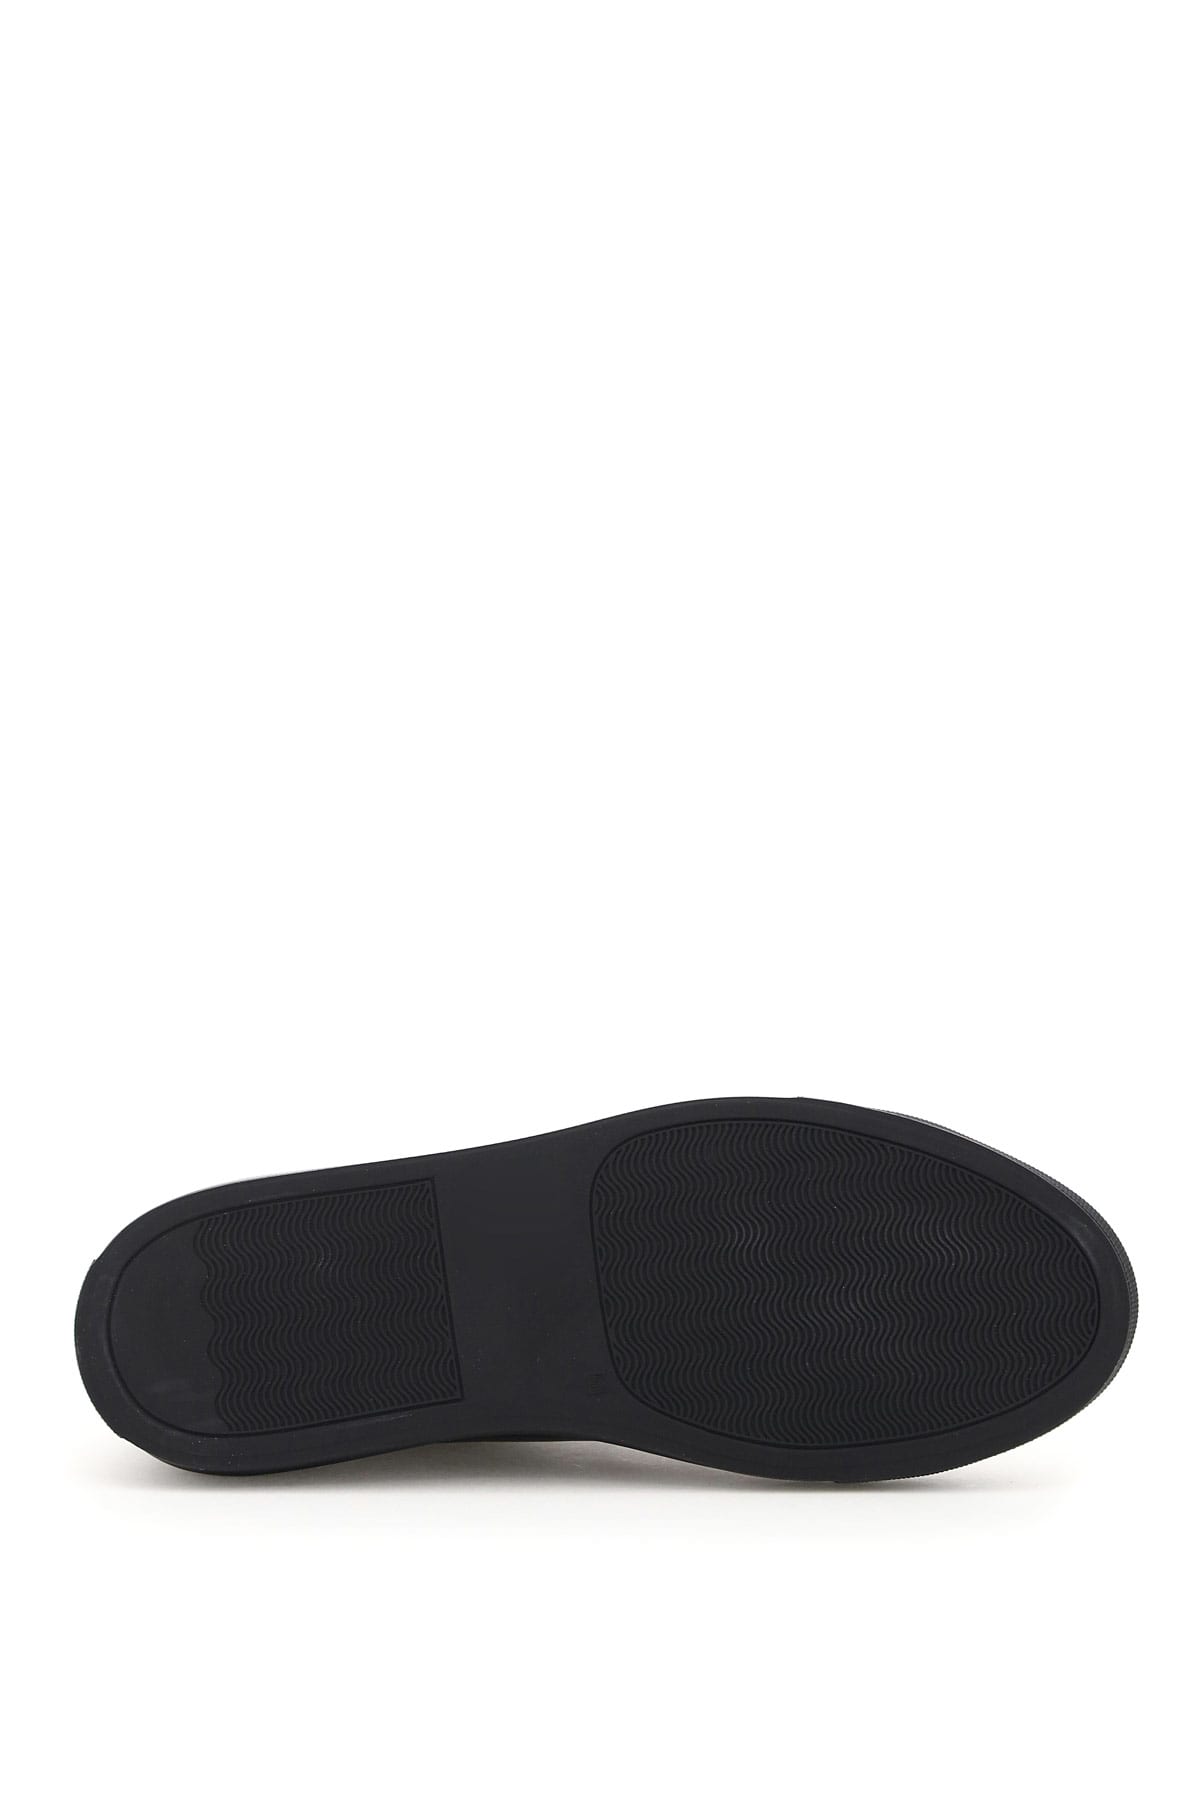 Shop Common Projects Original Achilles Leather Sneakers In Black (black)